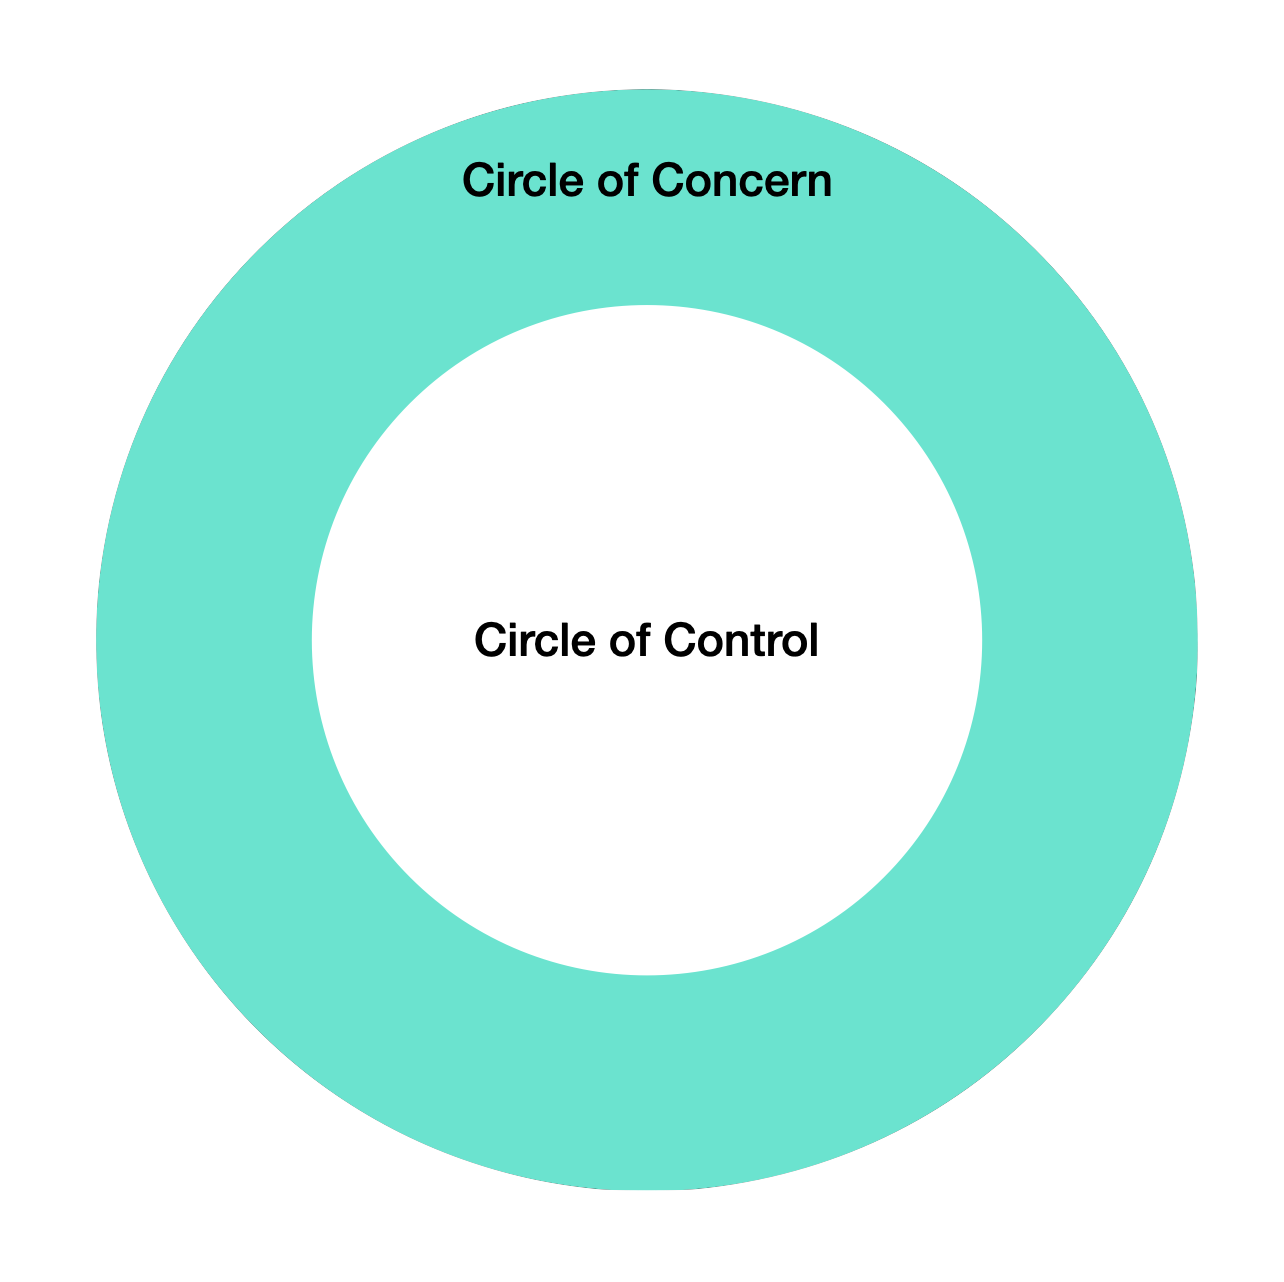 Circle of Control - Stephen Covey